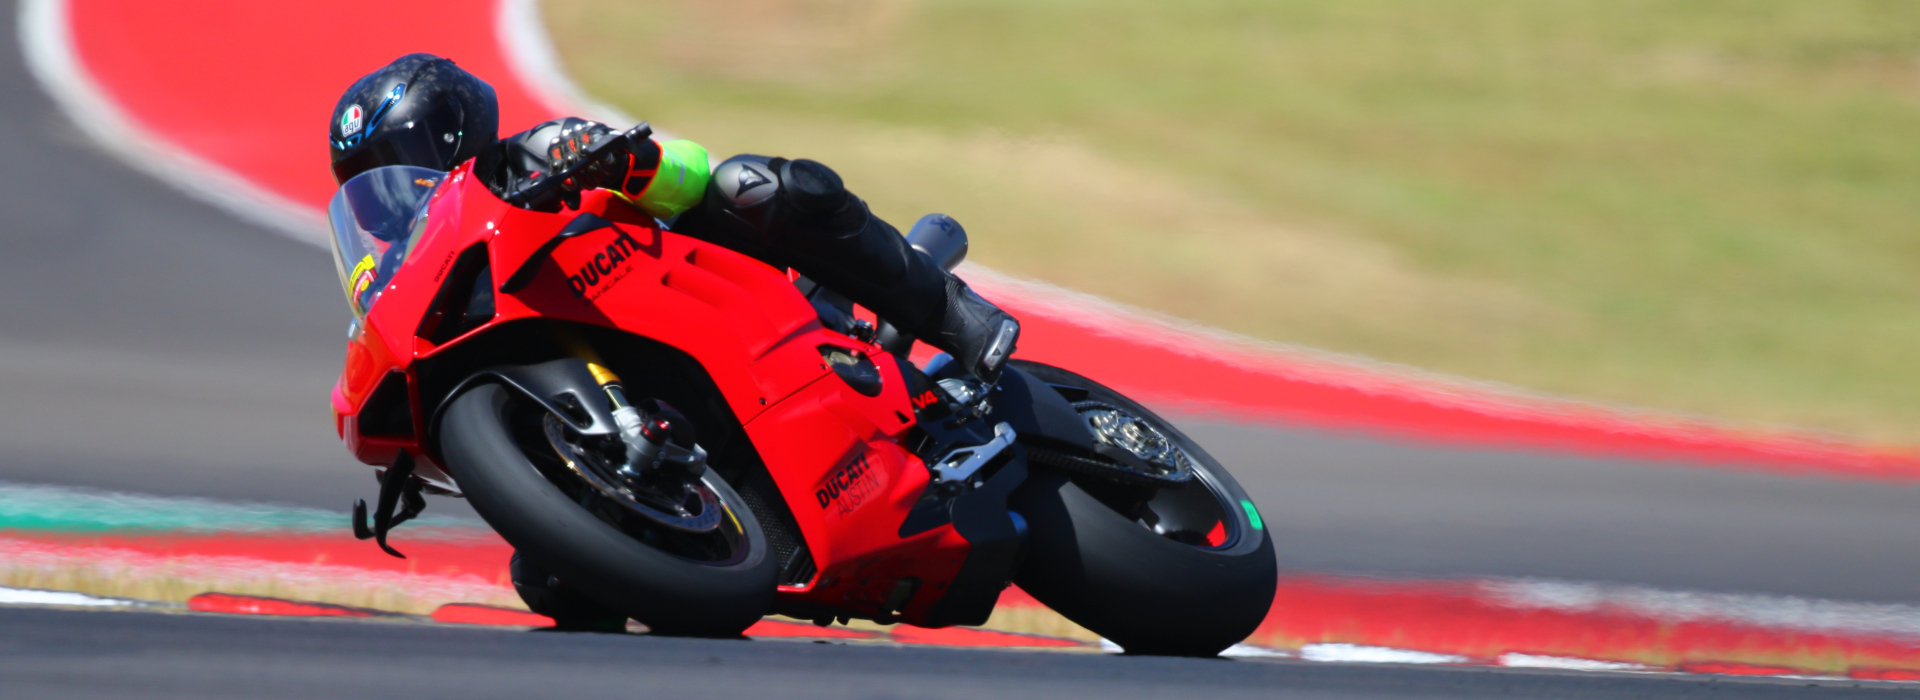 Go to motoaustin.com (test-ride-ducati-motorcycles-dealership--xsched_ride subpage)